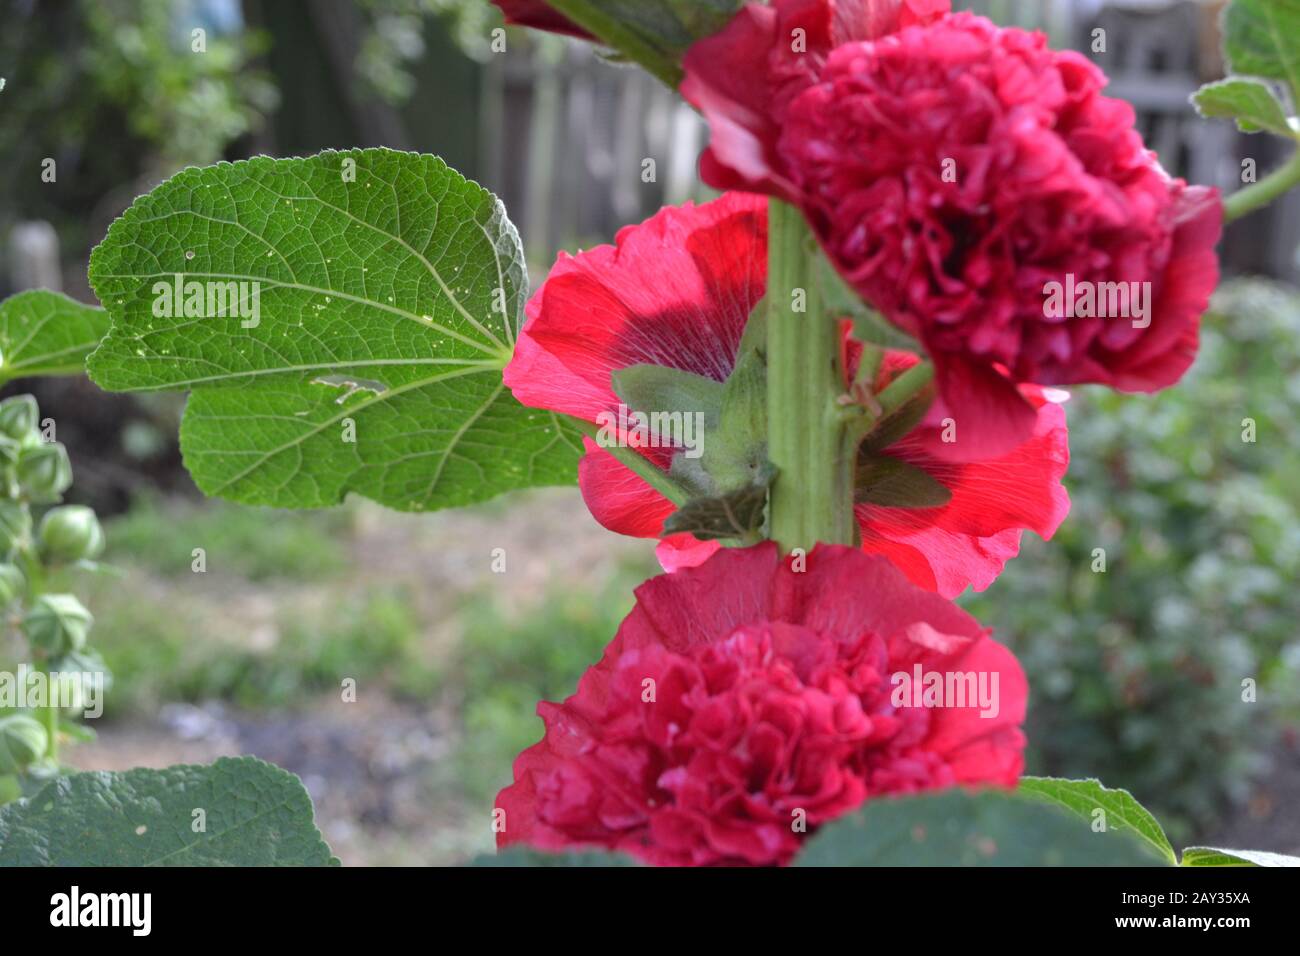 Mallow. Malva. Alcea. Large, curly flowers. The flower similar to a rose. Red, burgundy. Close-up. Sun rays. Garden Stock Photo